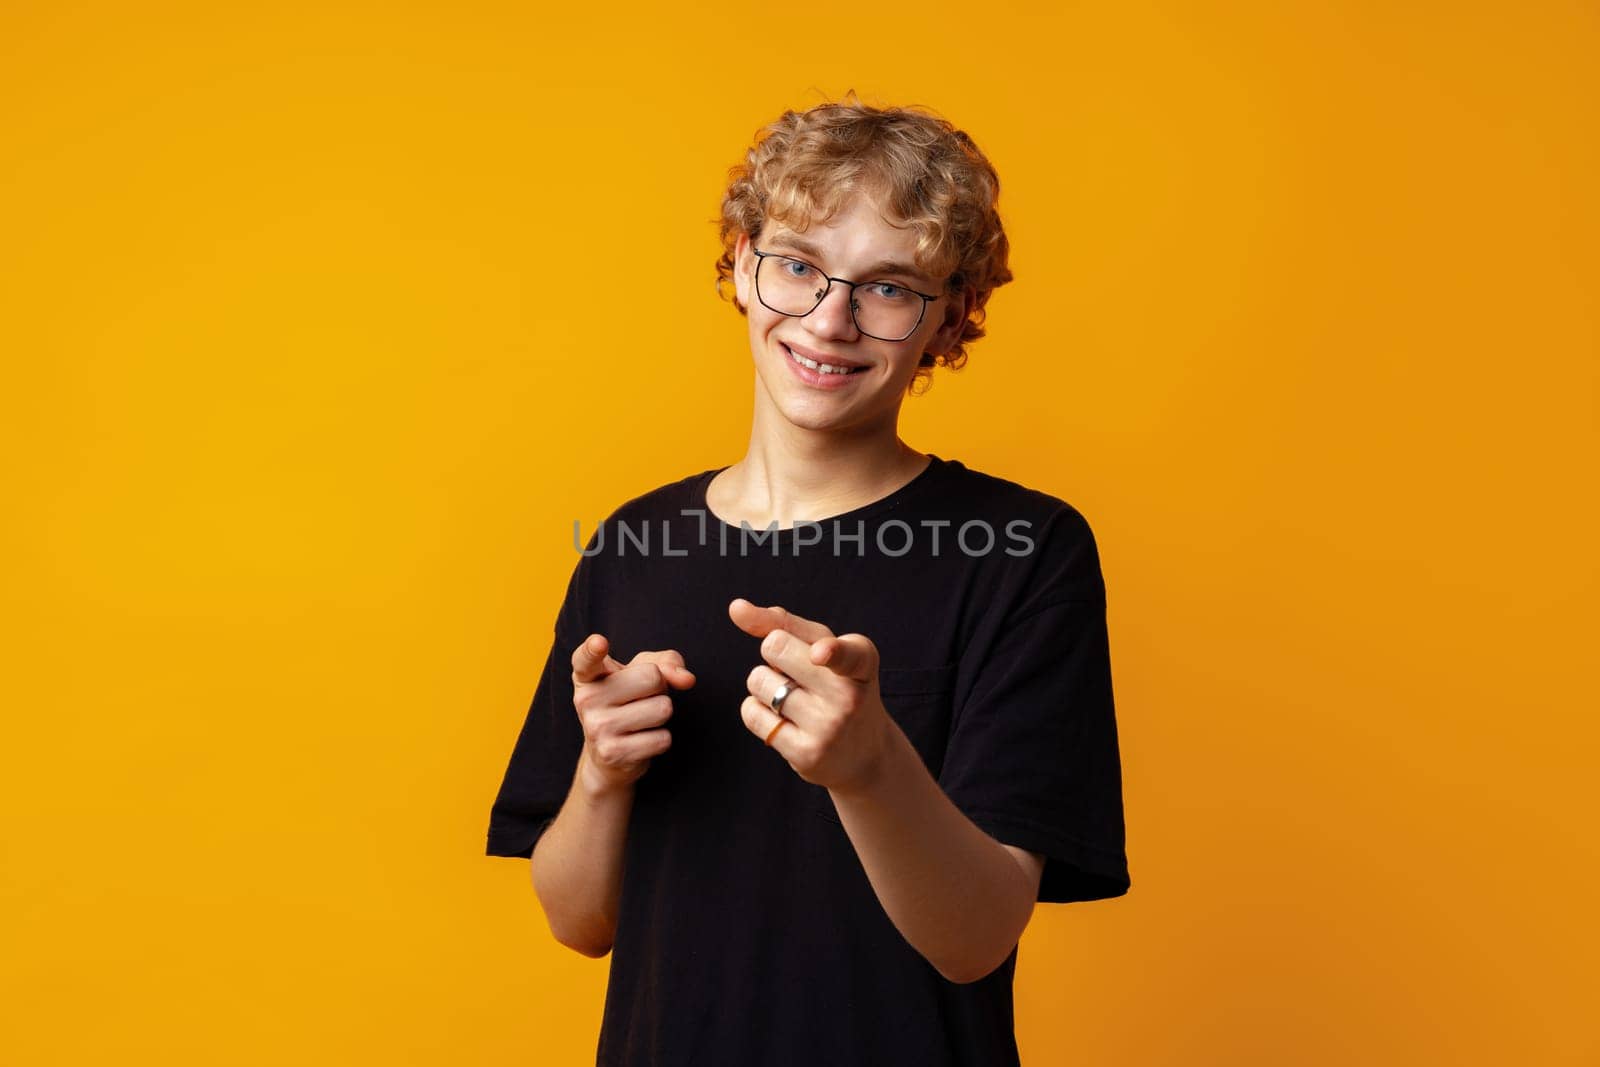 Young curly-haired man in glasses pointing to camera against yellow background close up